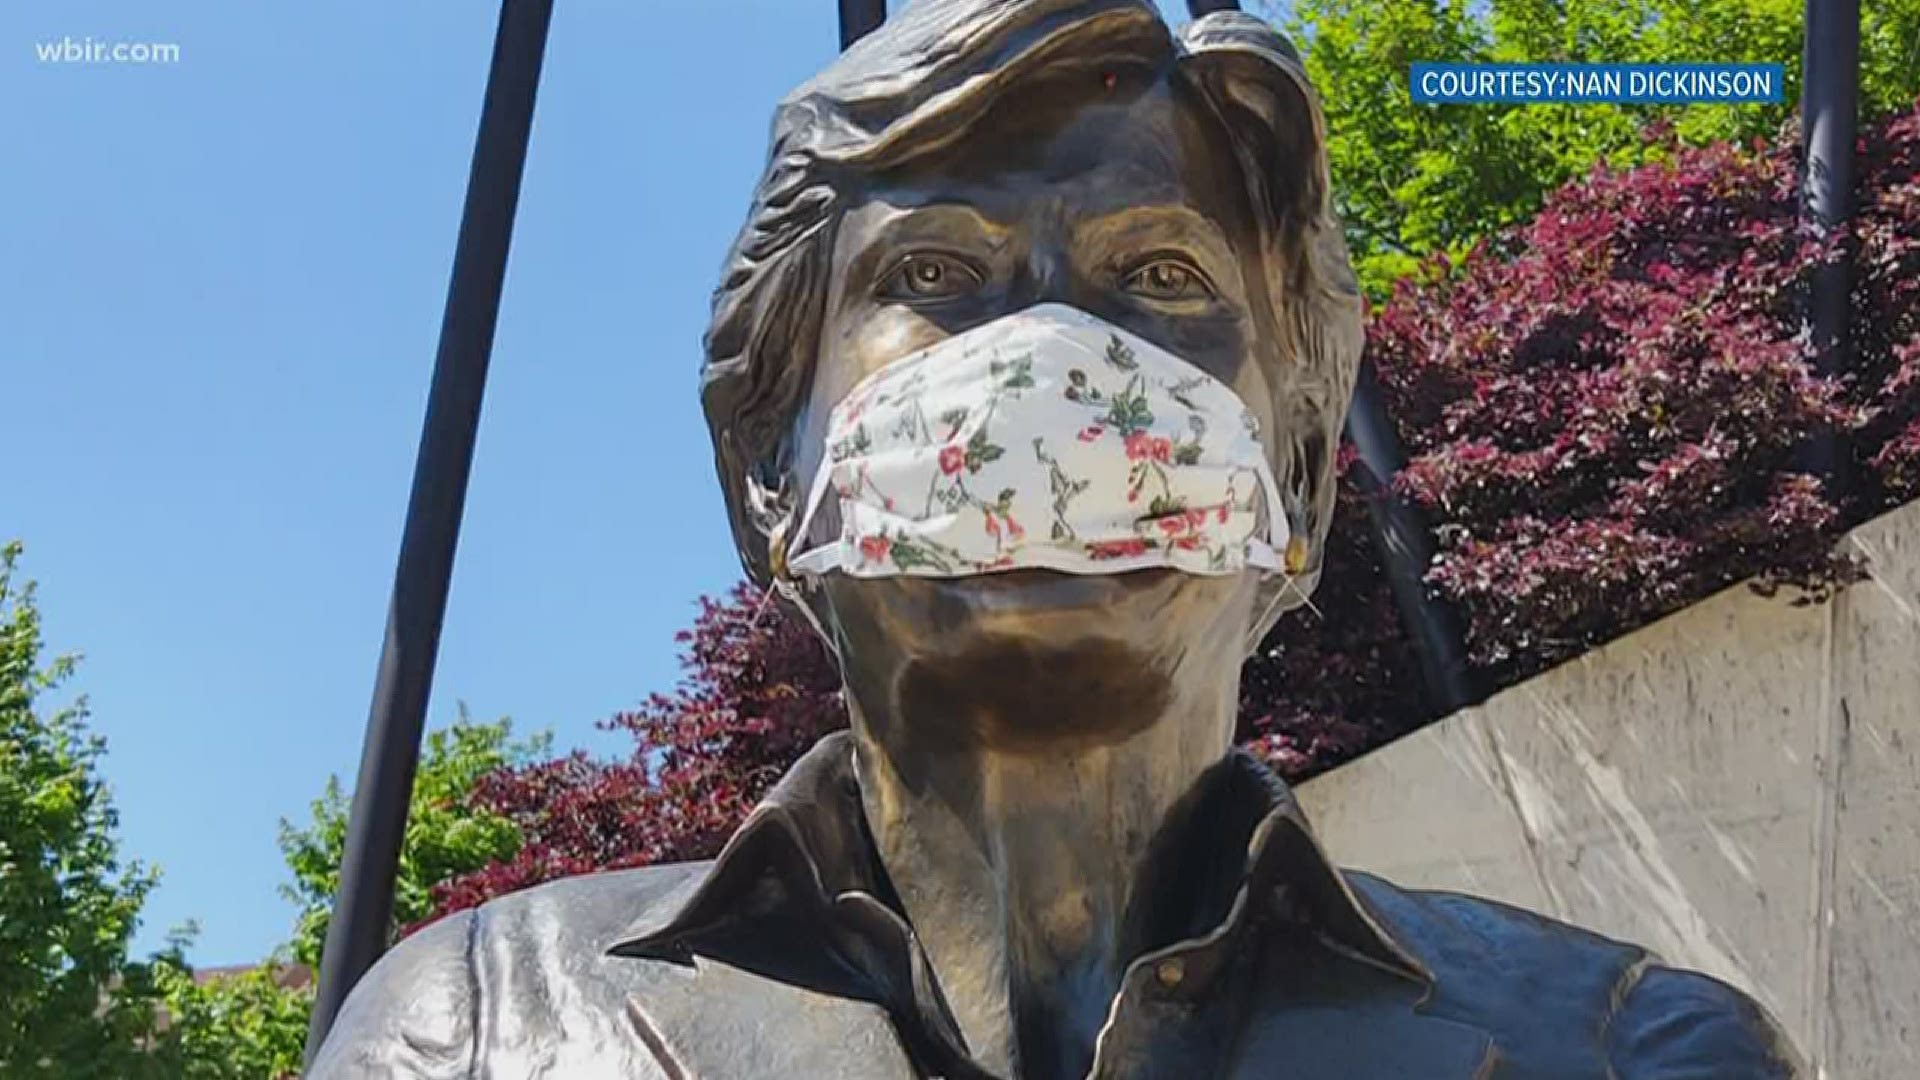 The statues around downtown Knoxville and UT Campus are wearing masks as a reminder for people to protect themselves and others by following the example.